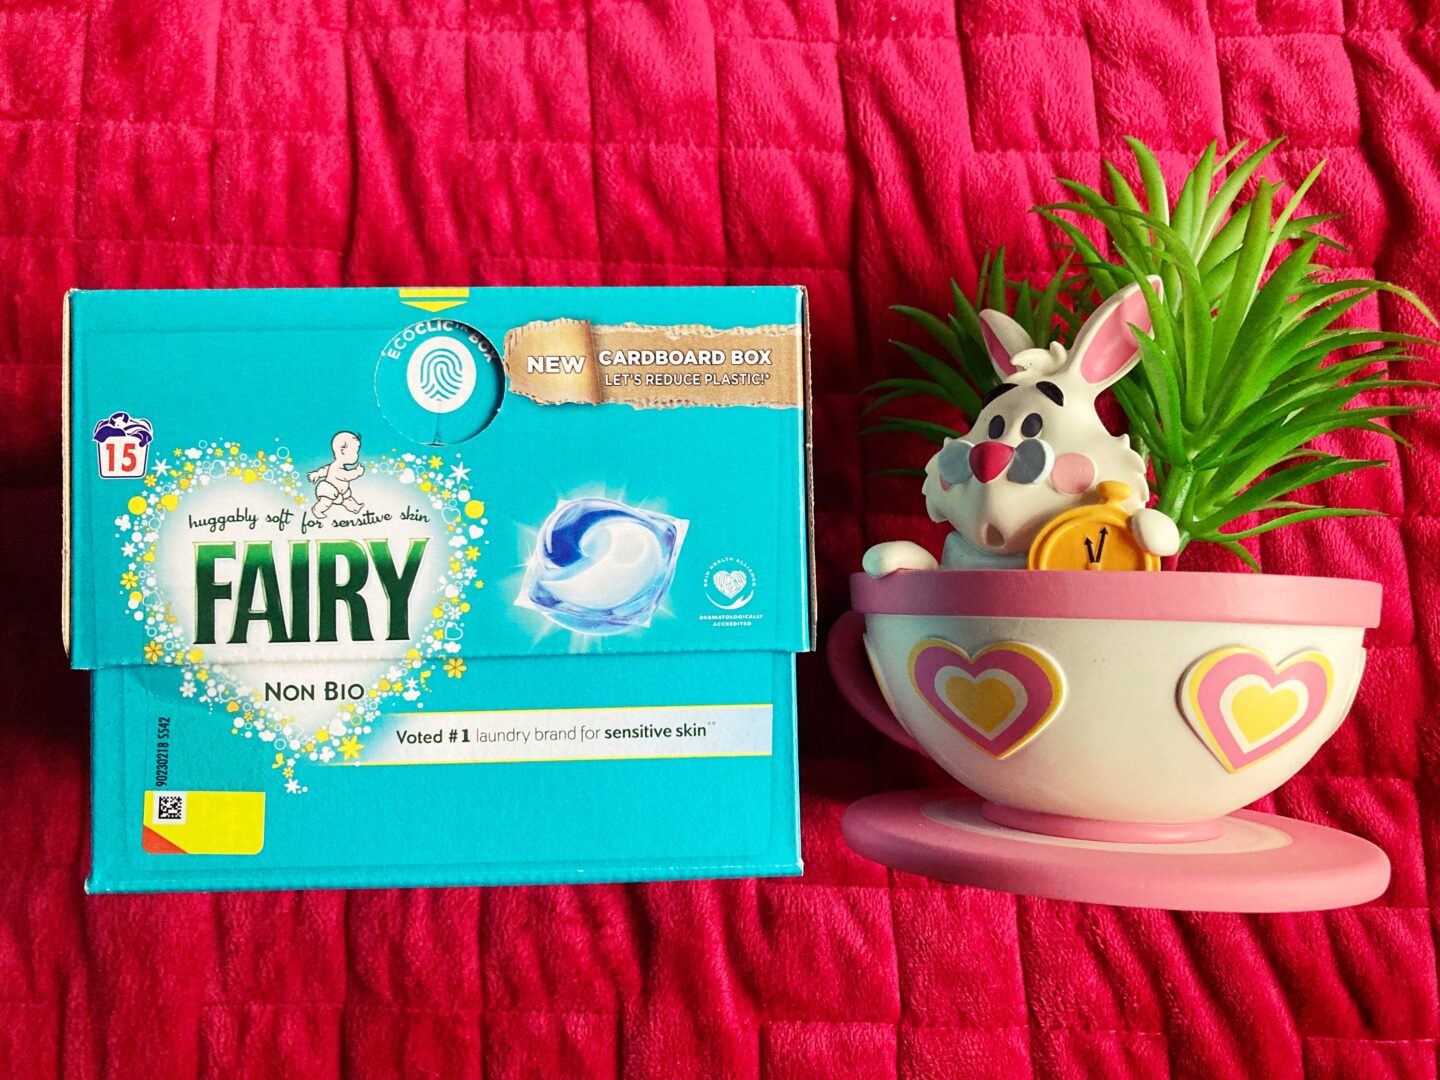 A photo of one of the Fairy Outdoorables products against a red blanket. A teacup and saucer-style potted plant in the style of Alice In Wonderland with the White Rabbit in it sits to the right of the product.